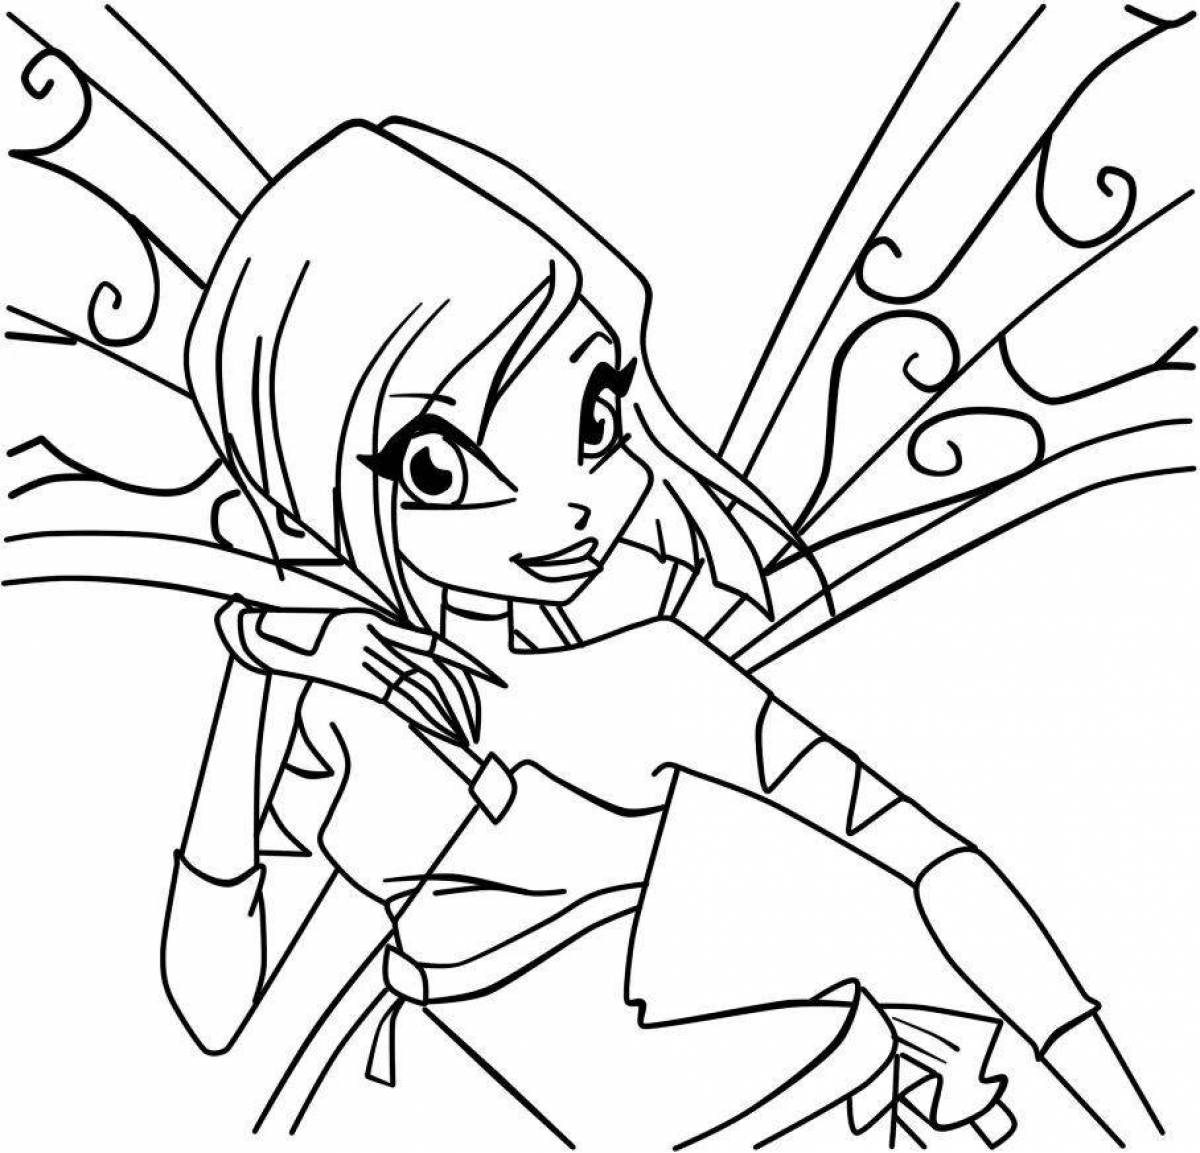 Playful winx coloring for girls fairies